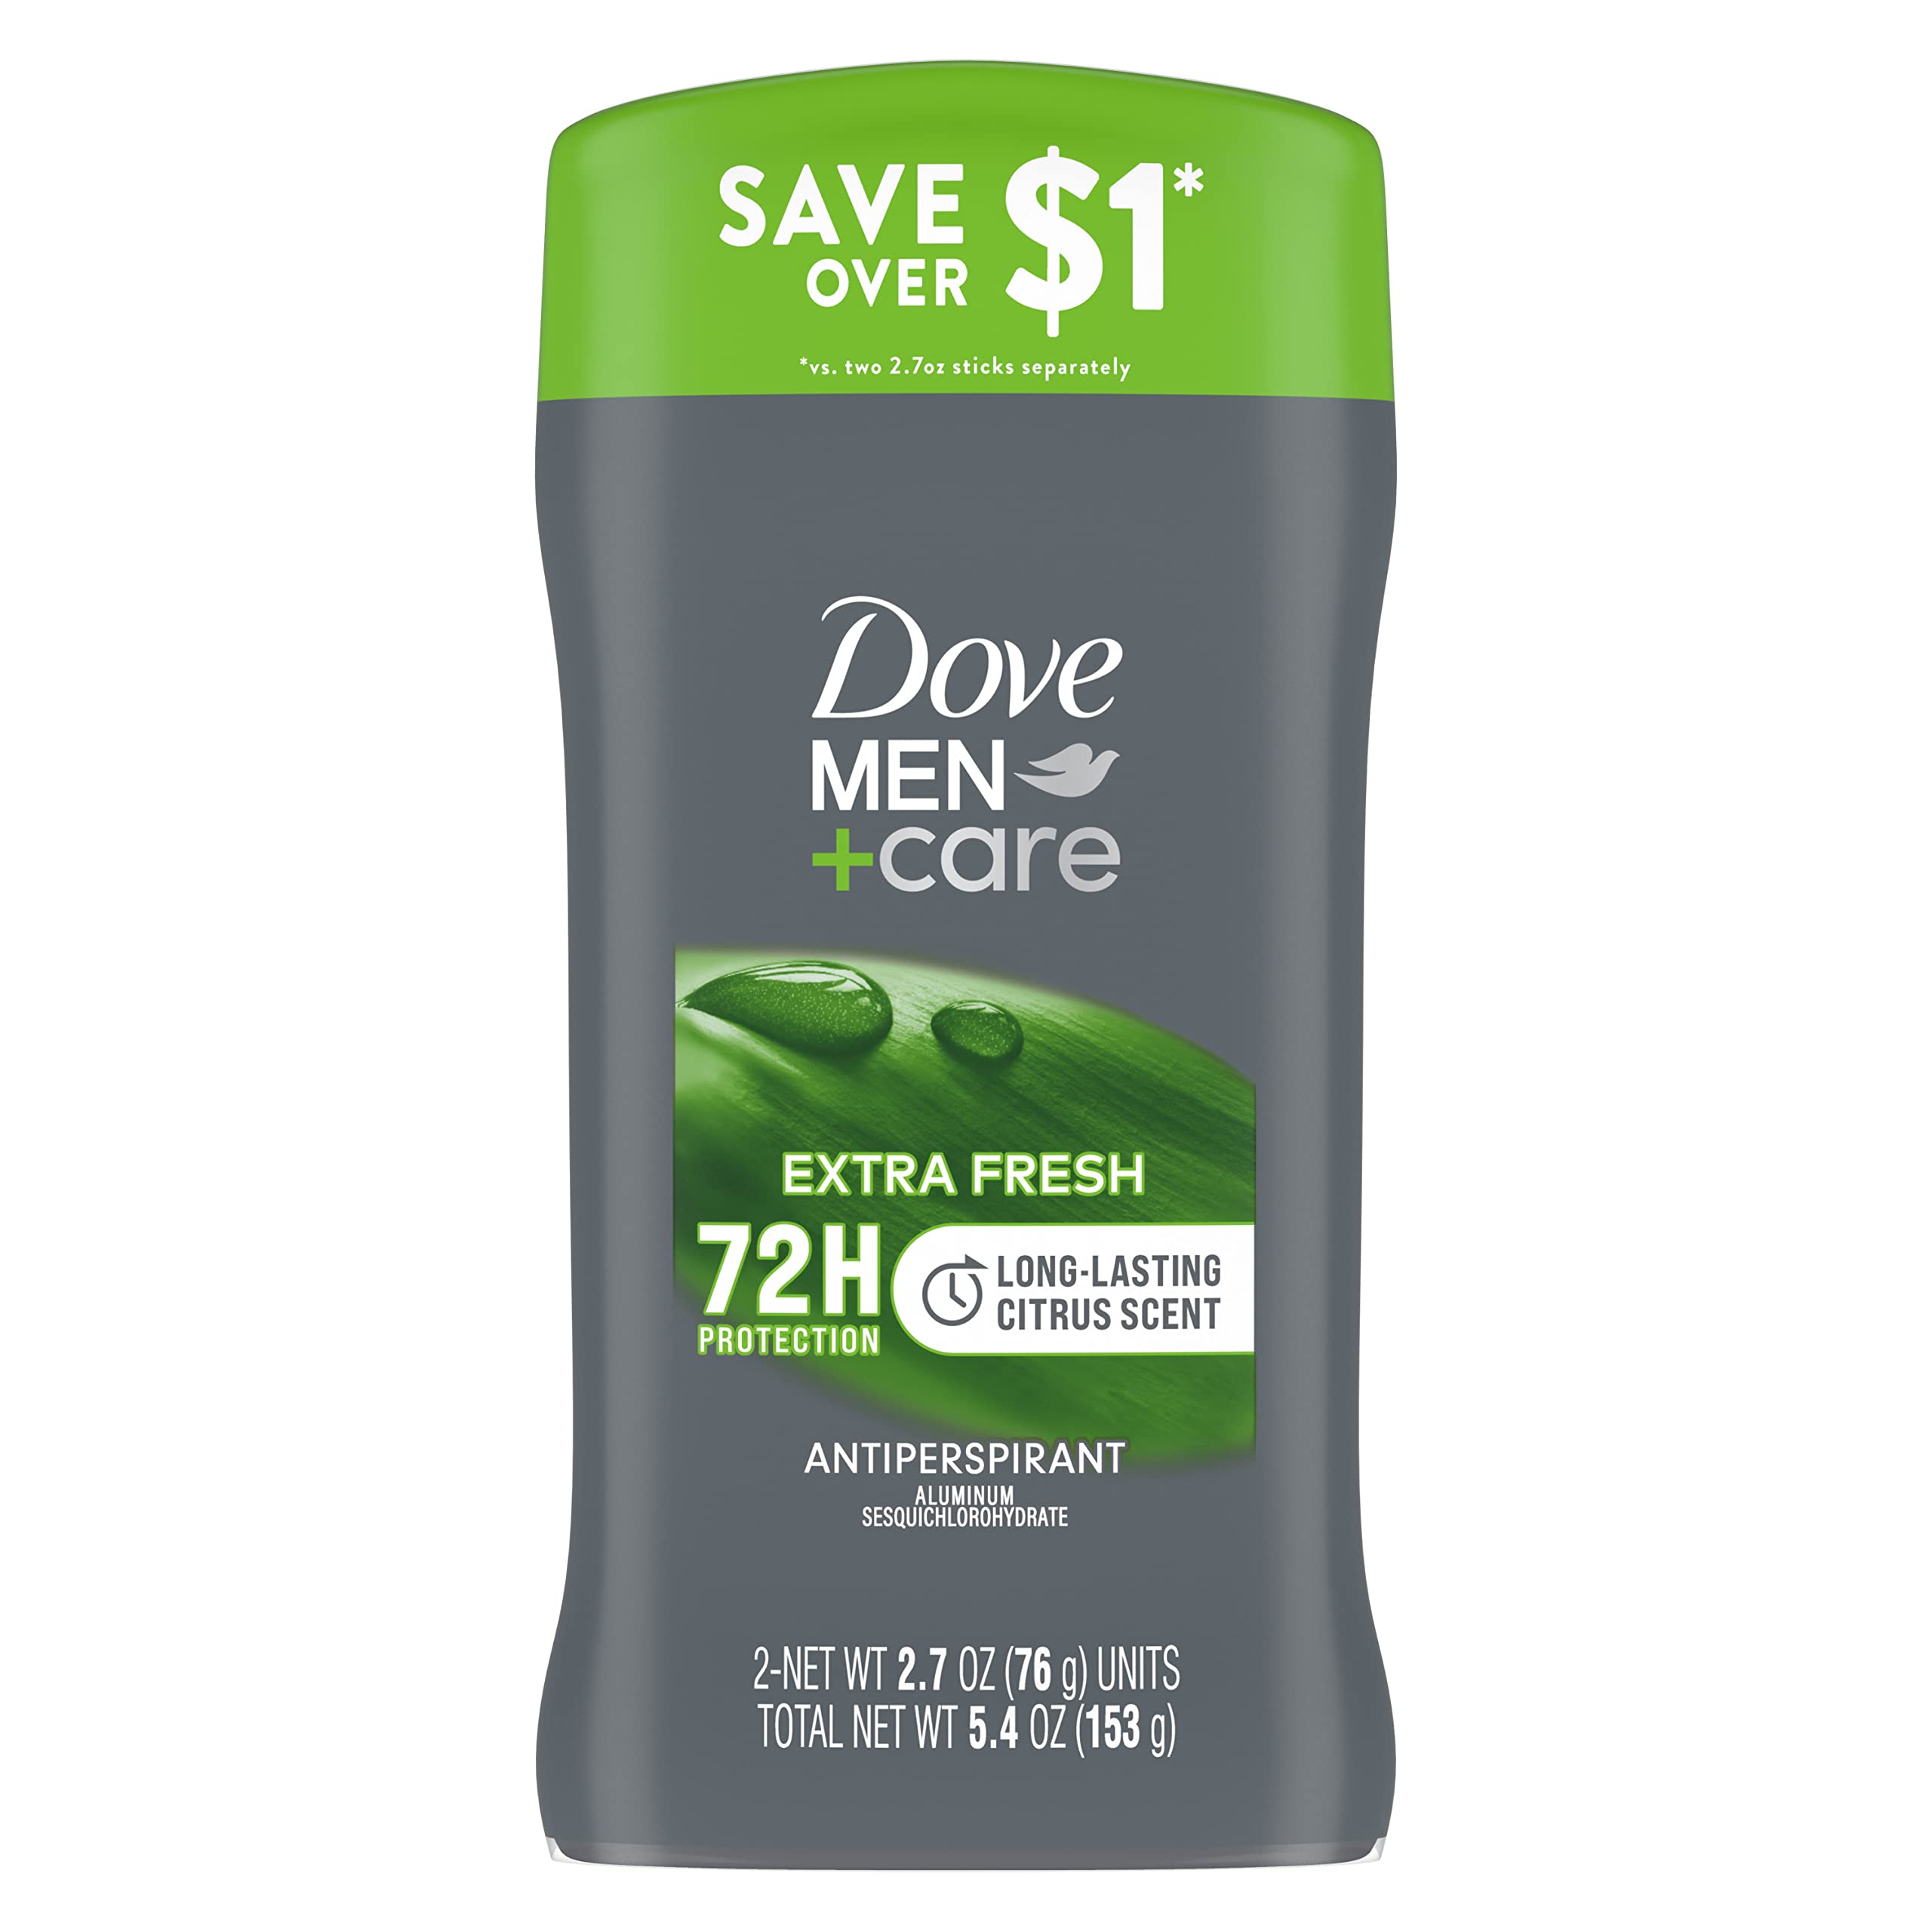 Dove Men+Care Extra Fresh Men's Antiperspirant Deodorant Stick Extra Fresh Twin pack With 72-hour sweat & odor protection with 1/4 Moisturizing Cream & Long-lasting Citrus Scent 2.7 Ounce (Pack of 2)